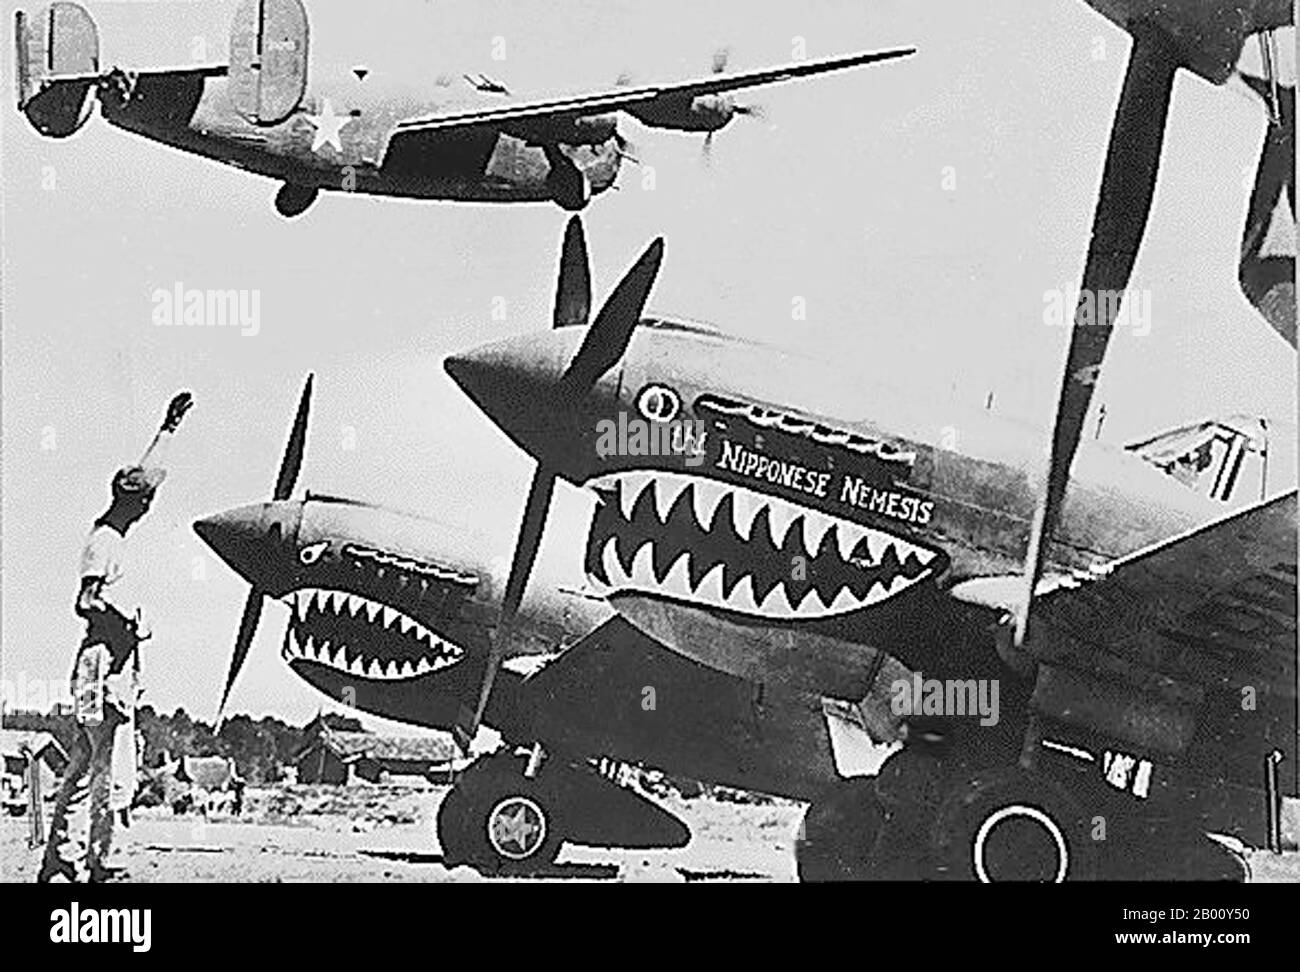 China: American Liberator bomber flies over Flying Tiger  P-40 fighters, Kunming, c. 1942.  Flying Tigers was the popular name of the 1st American Volunteer Group (AVG) of the Chinese Air Force in 1941-1942. The pilots were United States Army (USAAF), Navy (USN), and Marine Corps (USMC) personnel, recruited under Presidential sanction and commanded by Claire Lee Chennault; the ground crew and headquarters staff were likewise mostly recruited from the U.S. military, along with some civilians. The group consisted of three fighter squadrons with about 20 aircraft each. Stock Photo